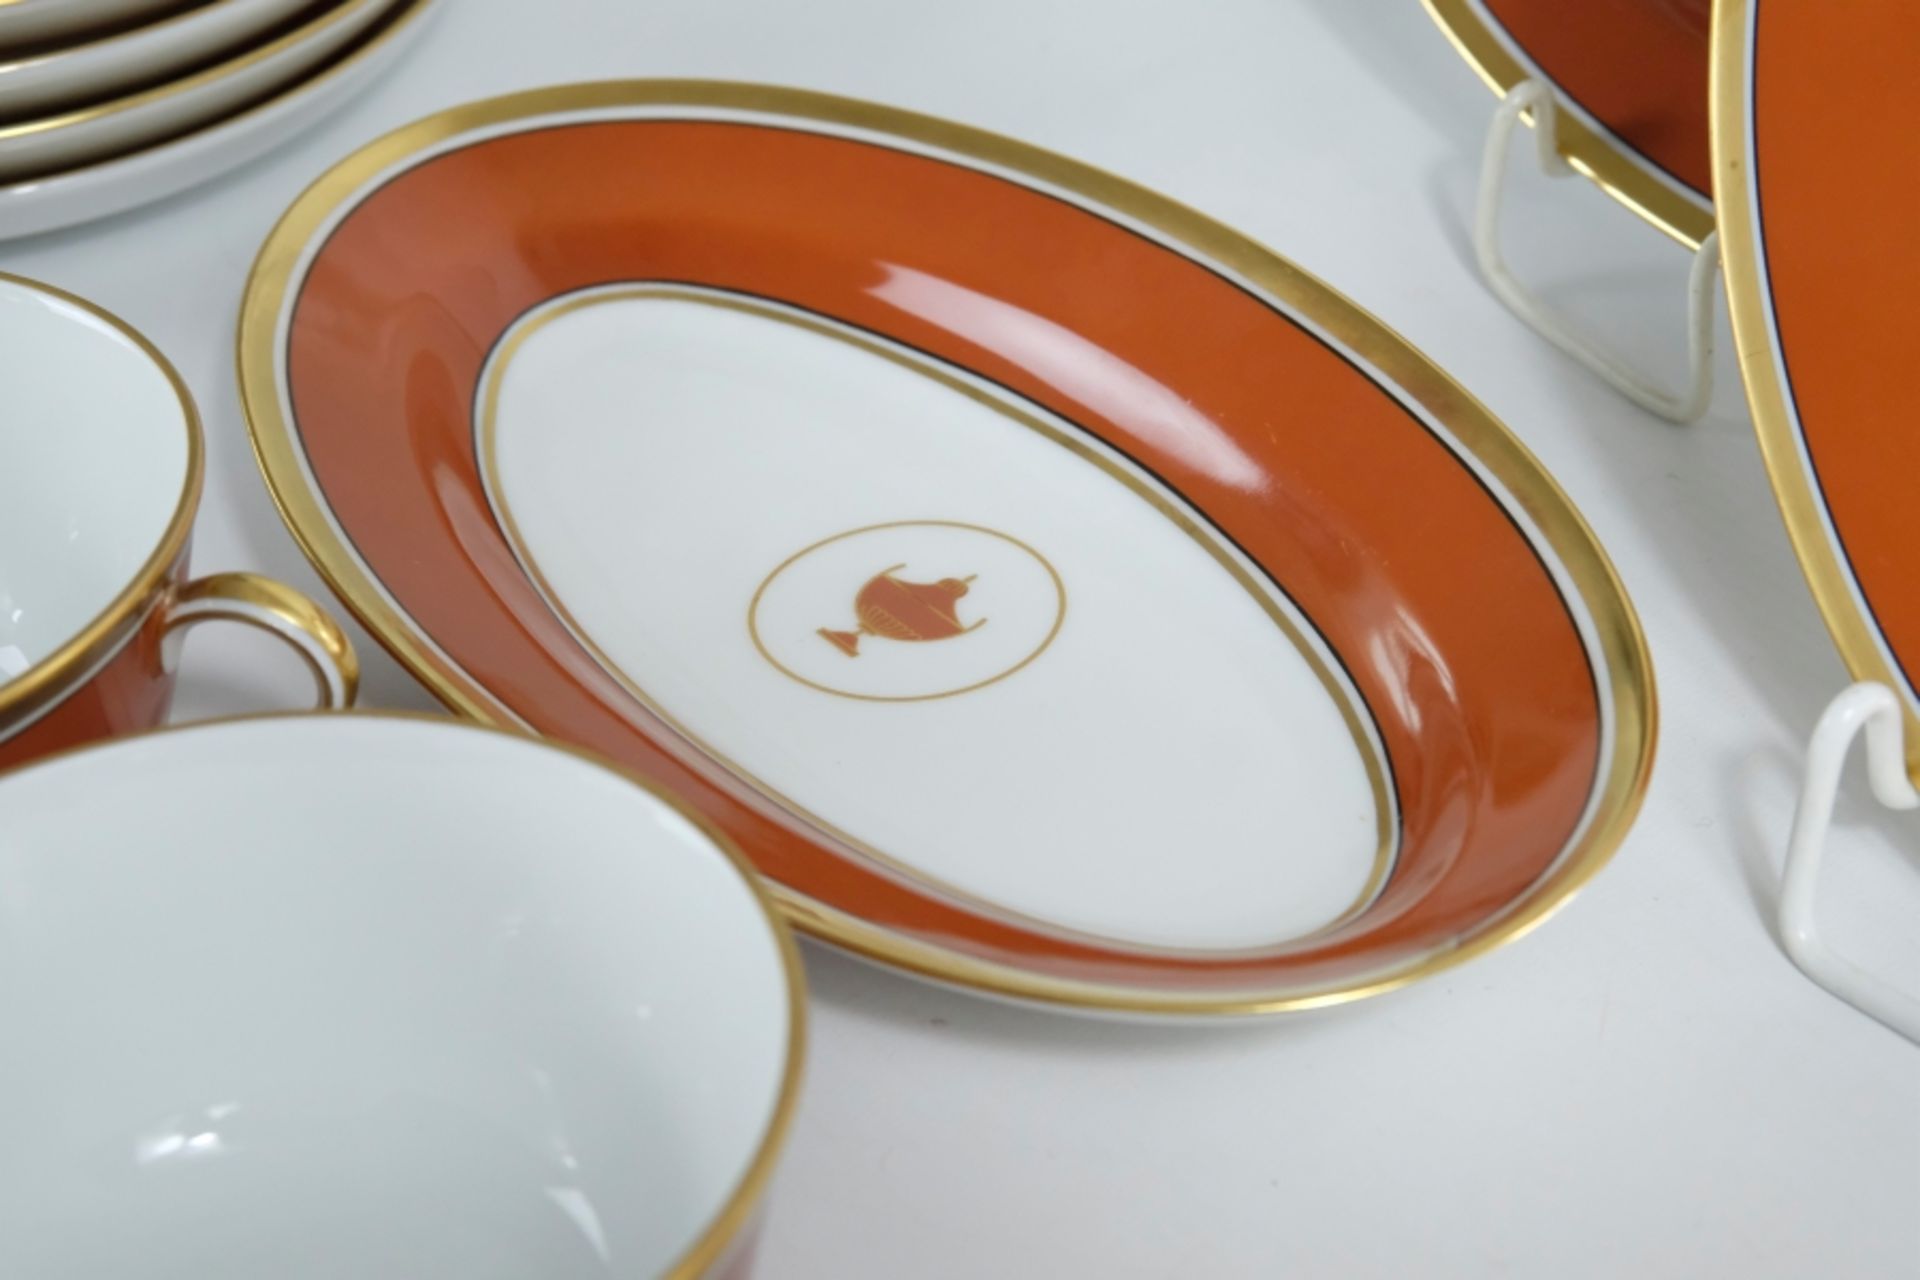 Richard Ginori "Contessa" dinner service, porcelain, white and terracotta with gold rim, consisting - Image 7 of 8